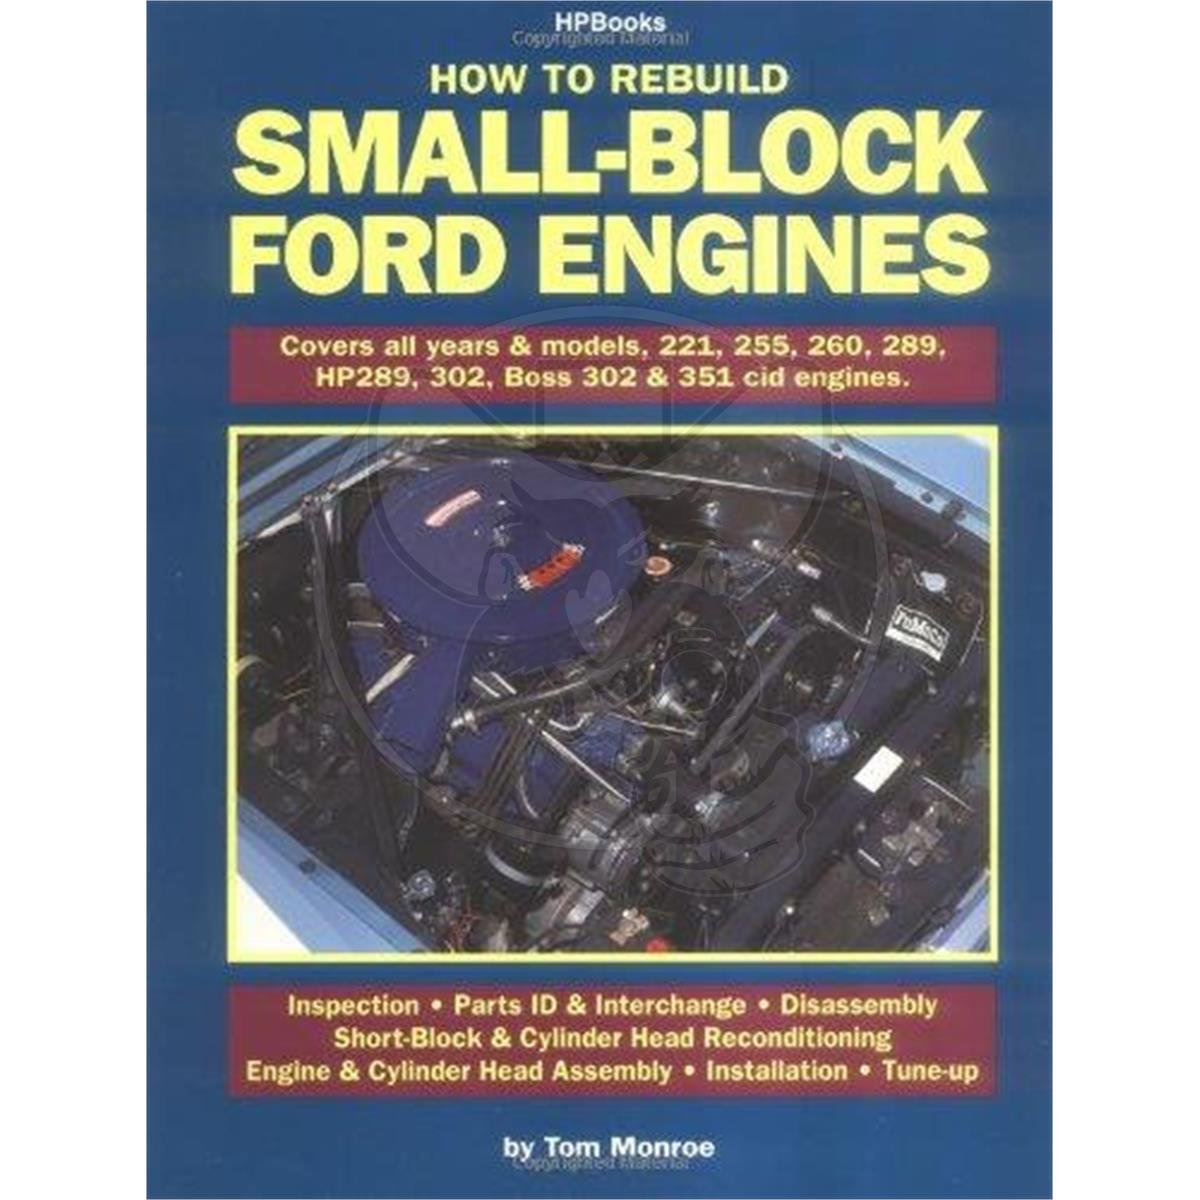 HP BOOKS HOW TO REBUILD SMALL BLOCK FORD ENGINES 260/289/302 BOSS